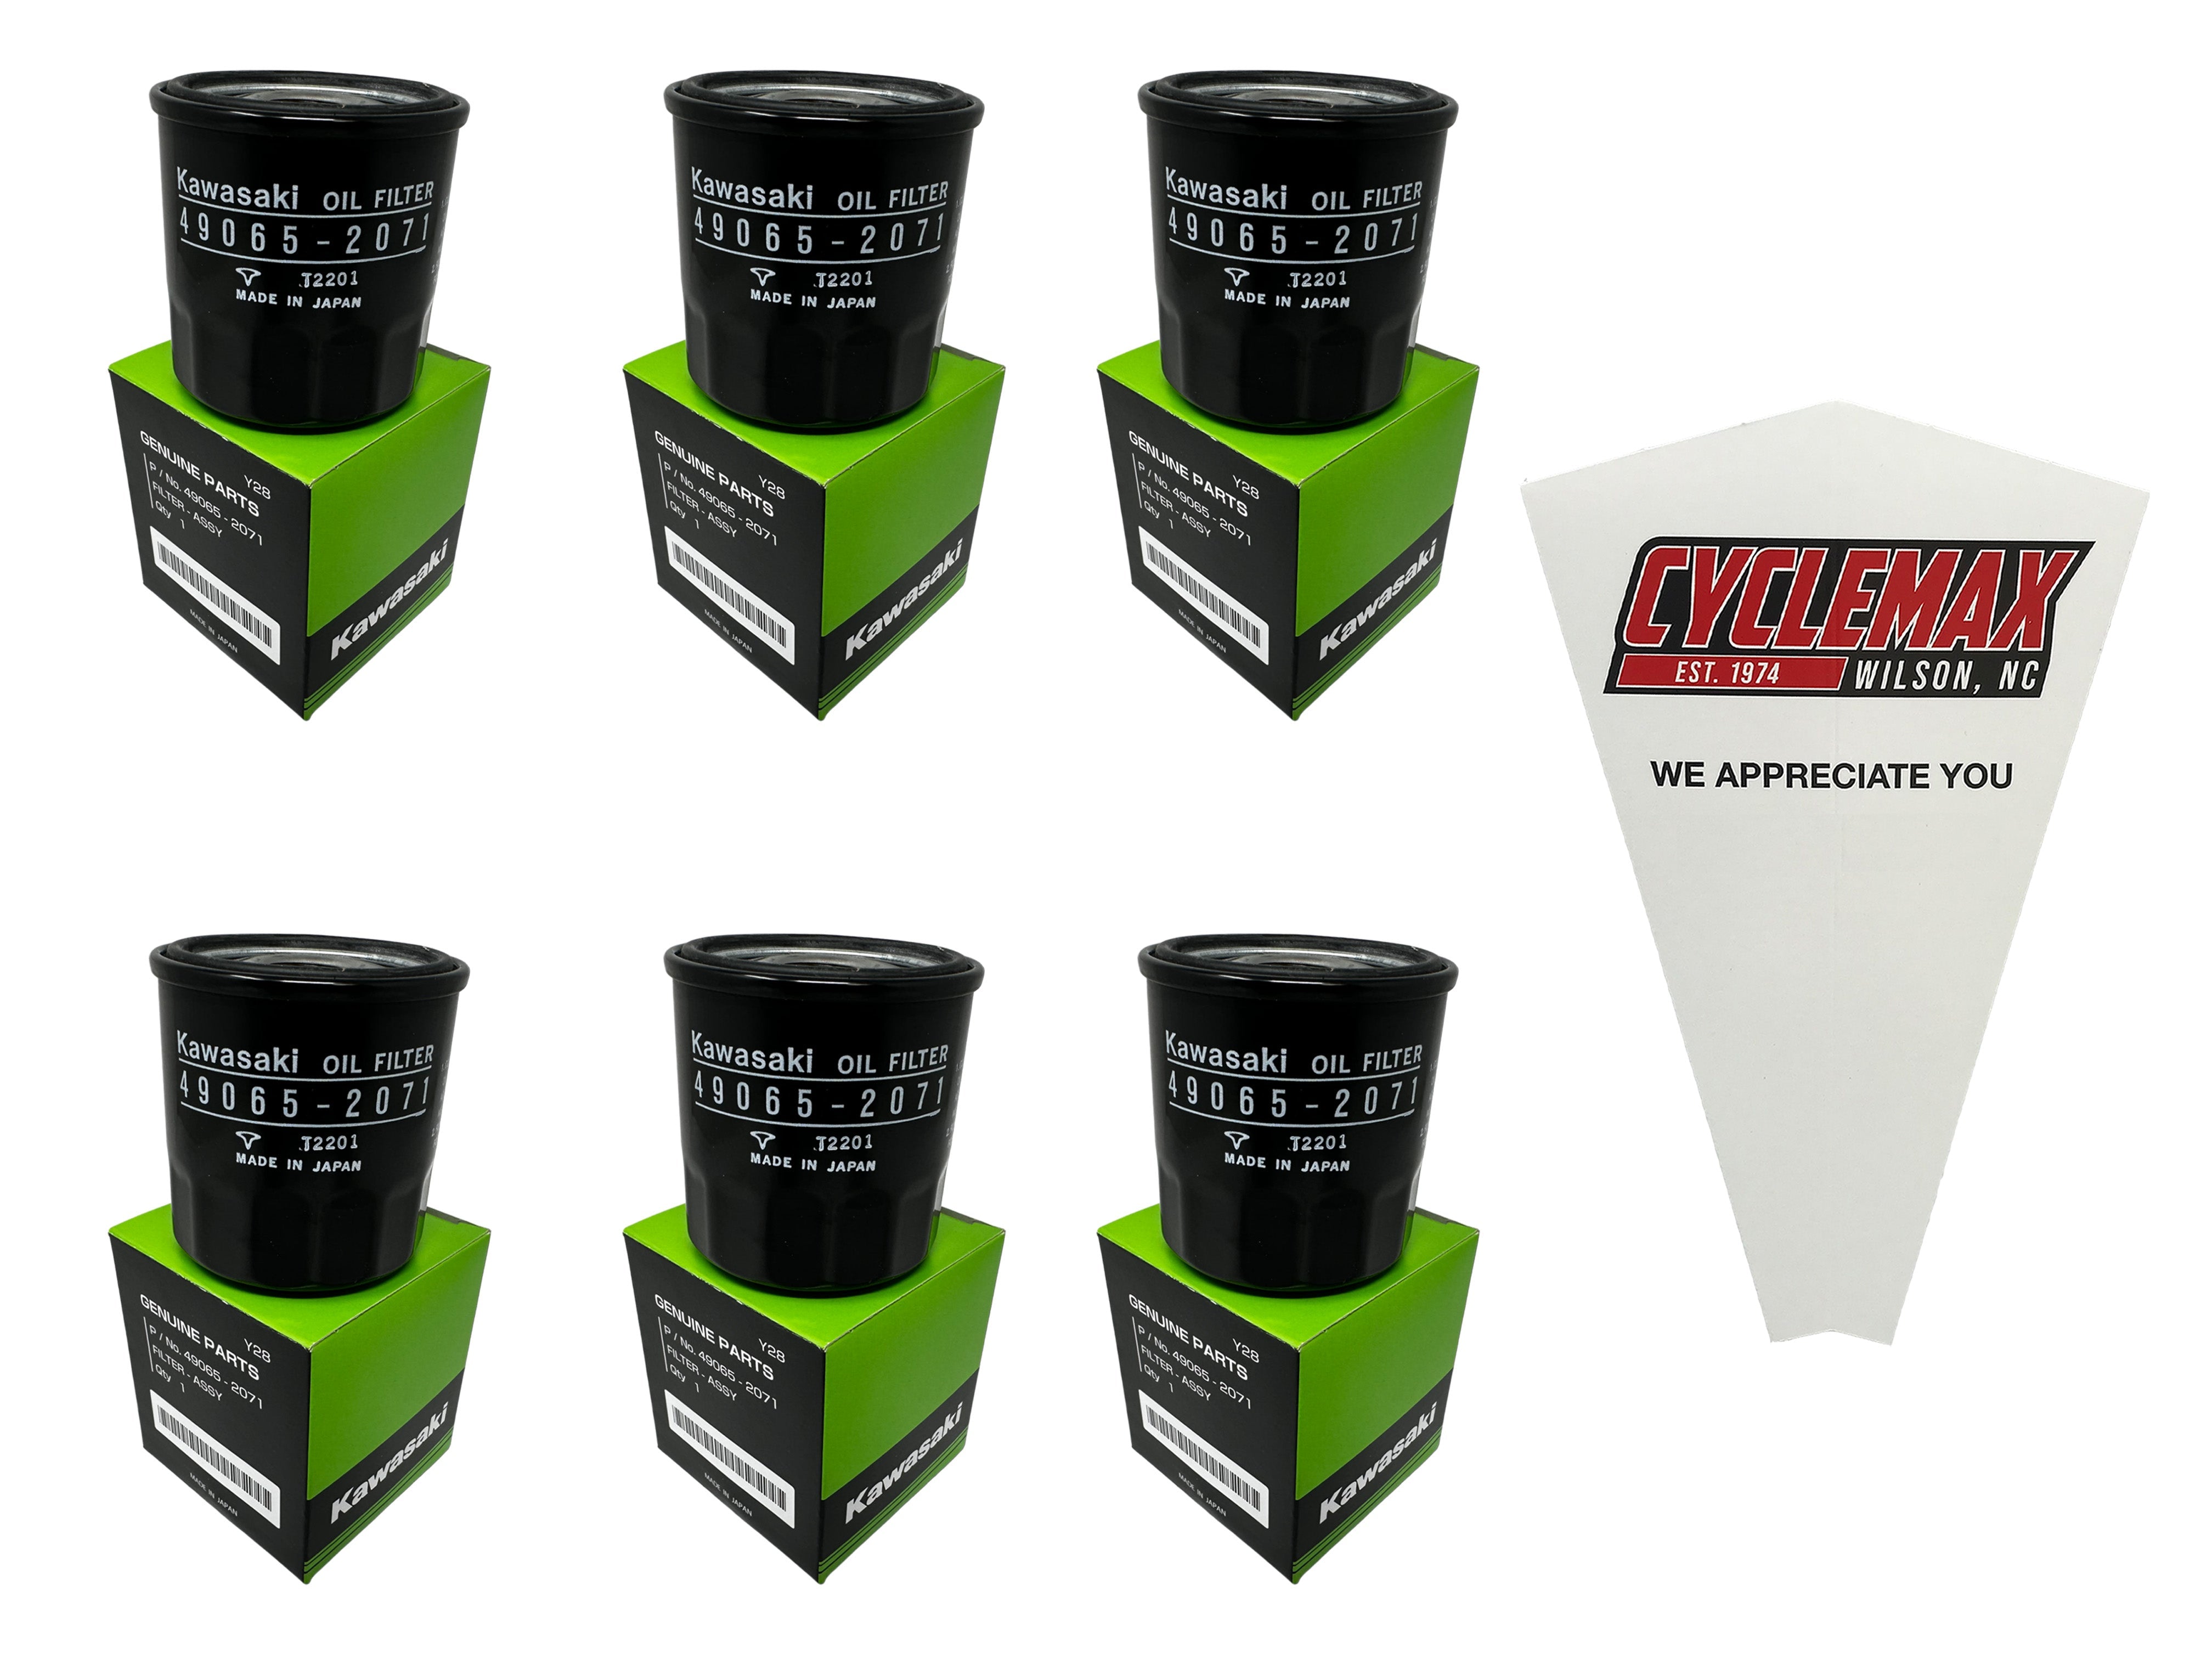 Cyclemax Six Pack for Kawasaki Oil Filter 49065-2071 Contains Six Filters and a Funnel